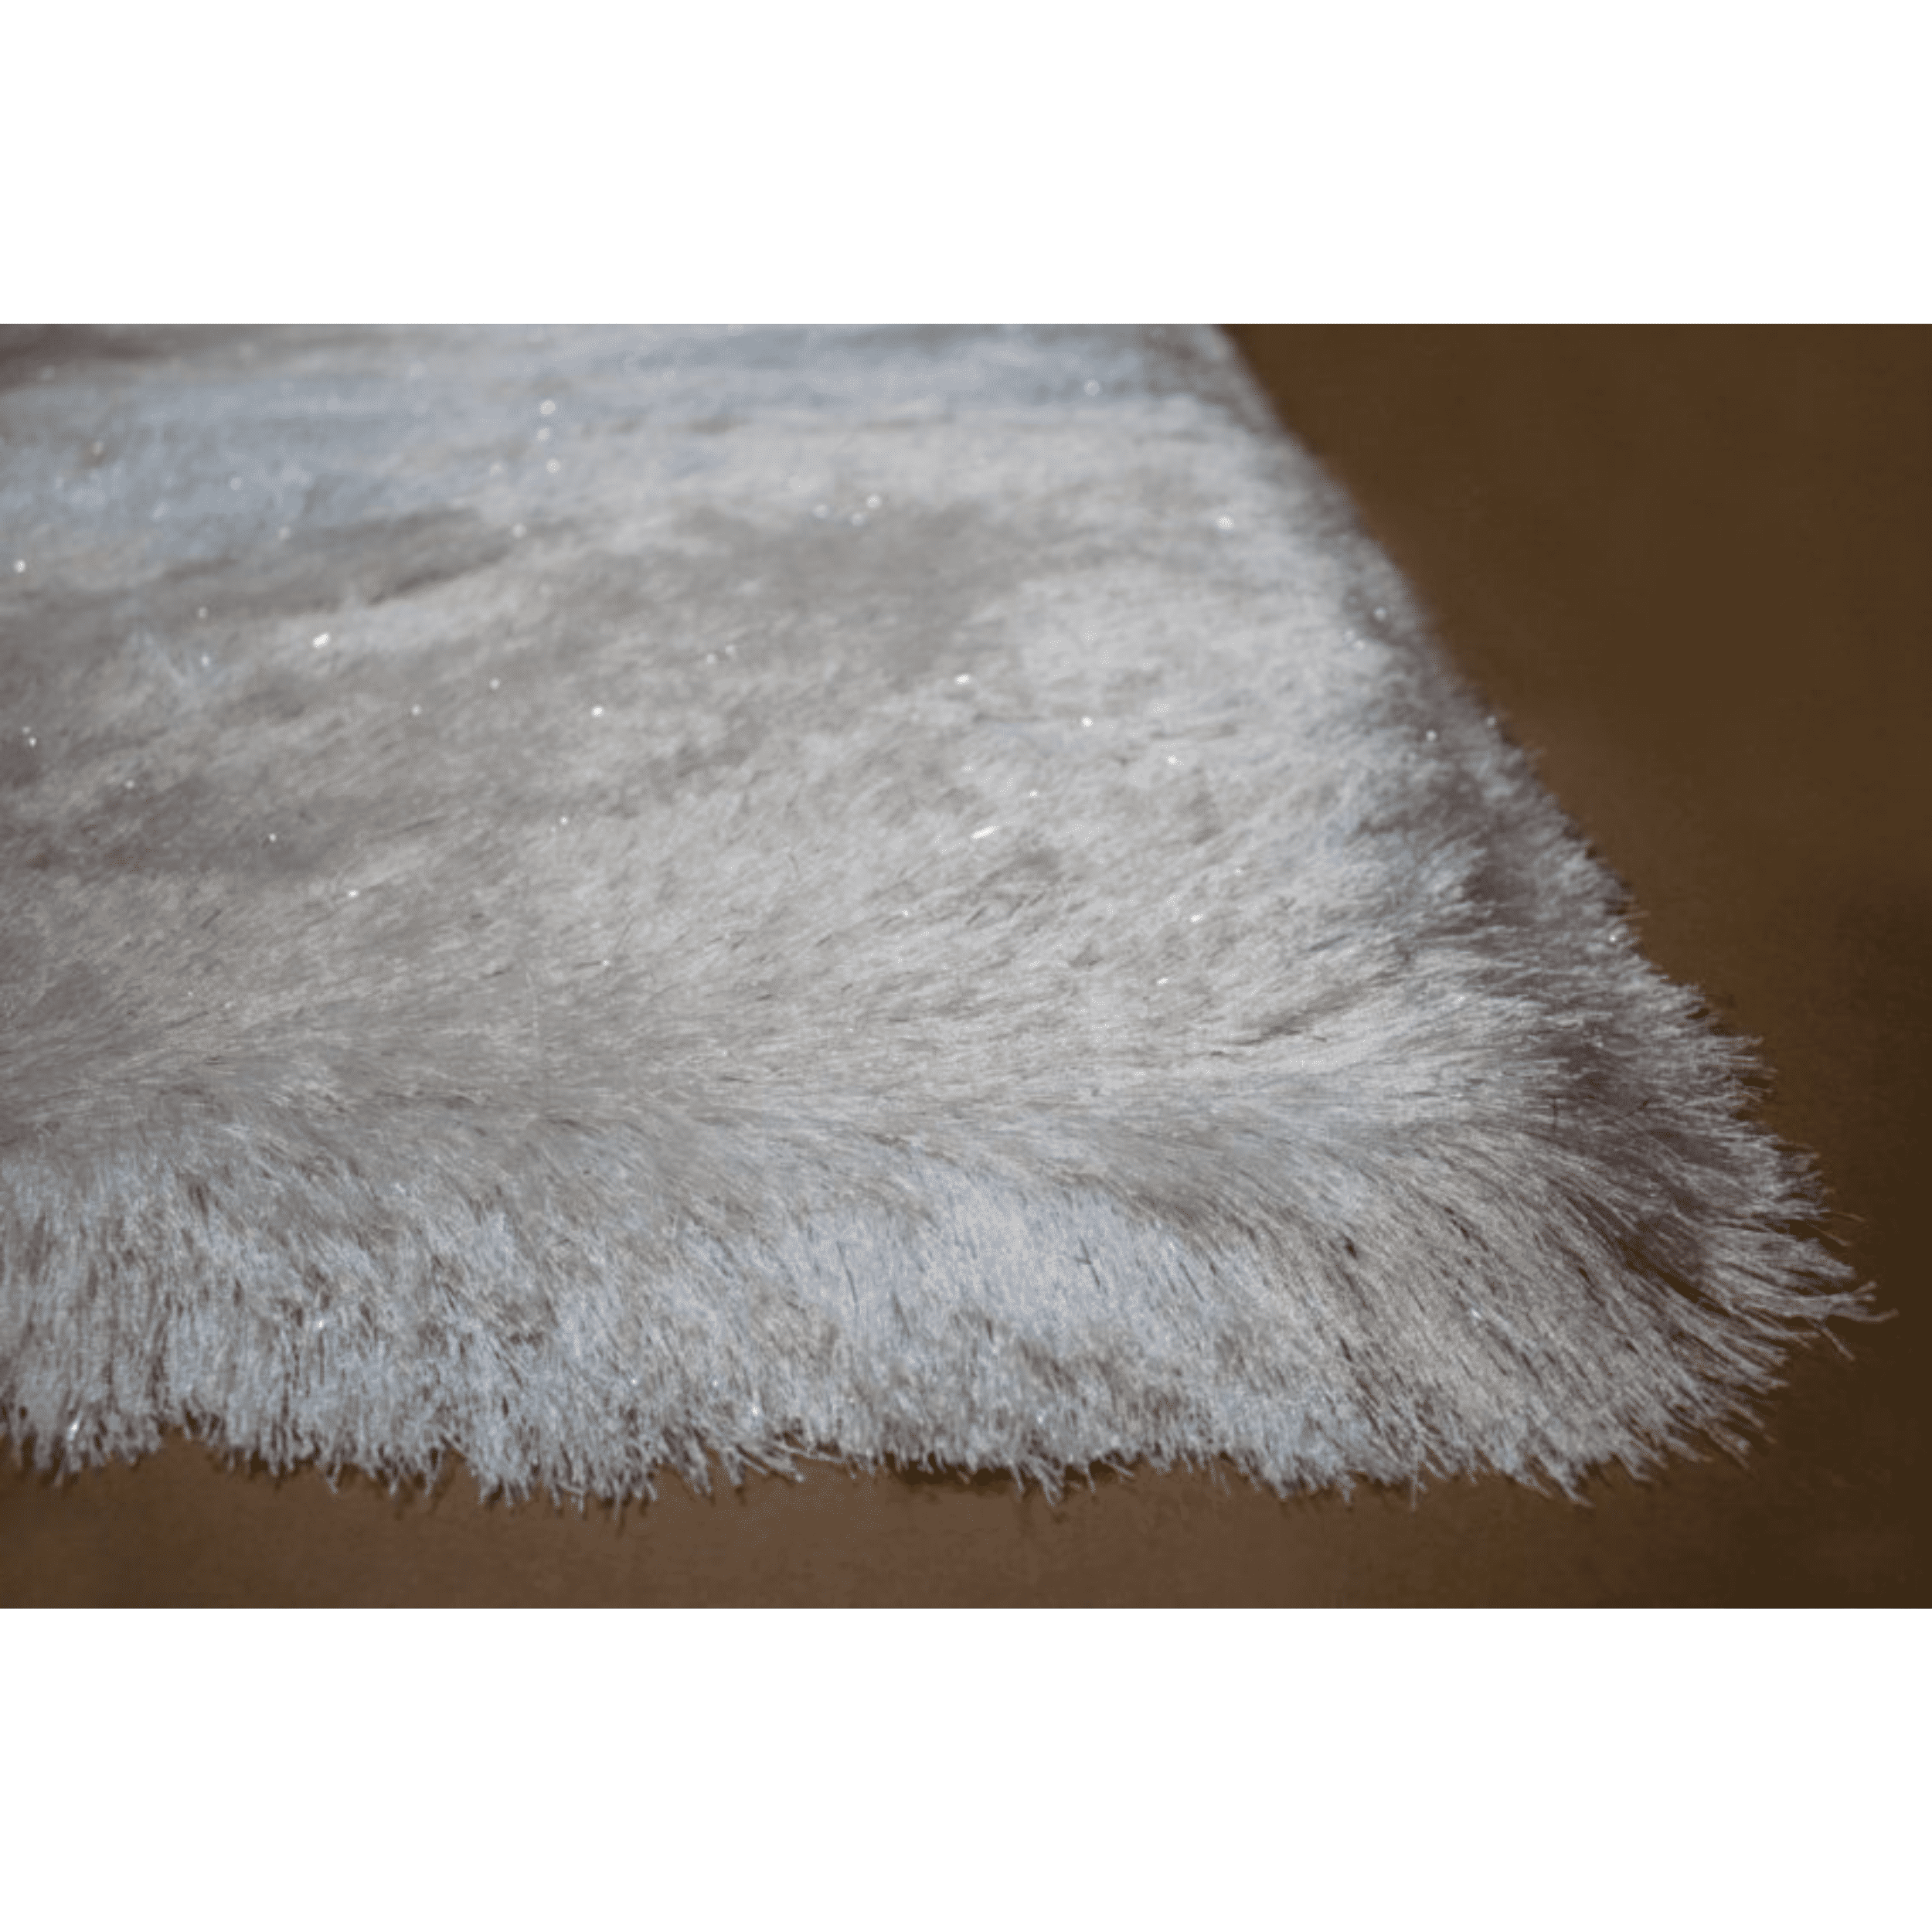 NEW LUXURIOUS THICK PILE RUG MODERN CONTEMPORARY SOFT SHINY SHAGGY RUGS RUNNERS 